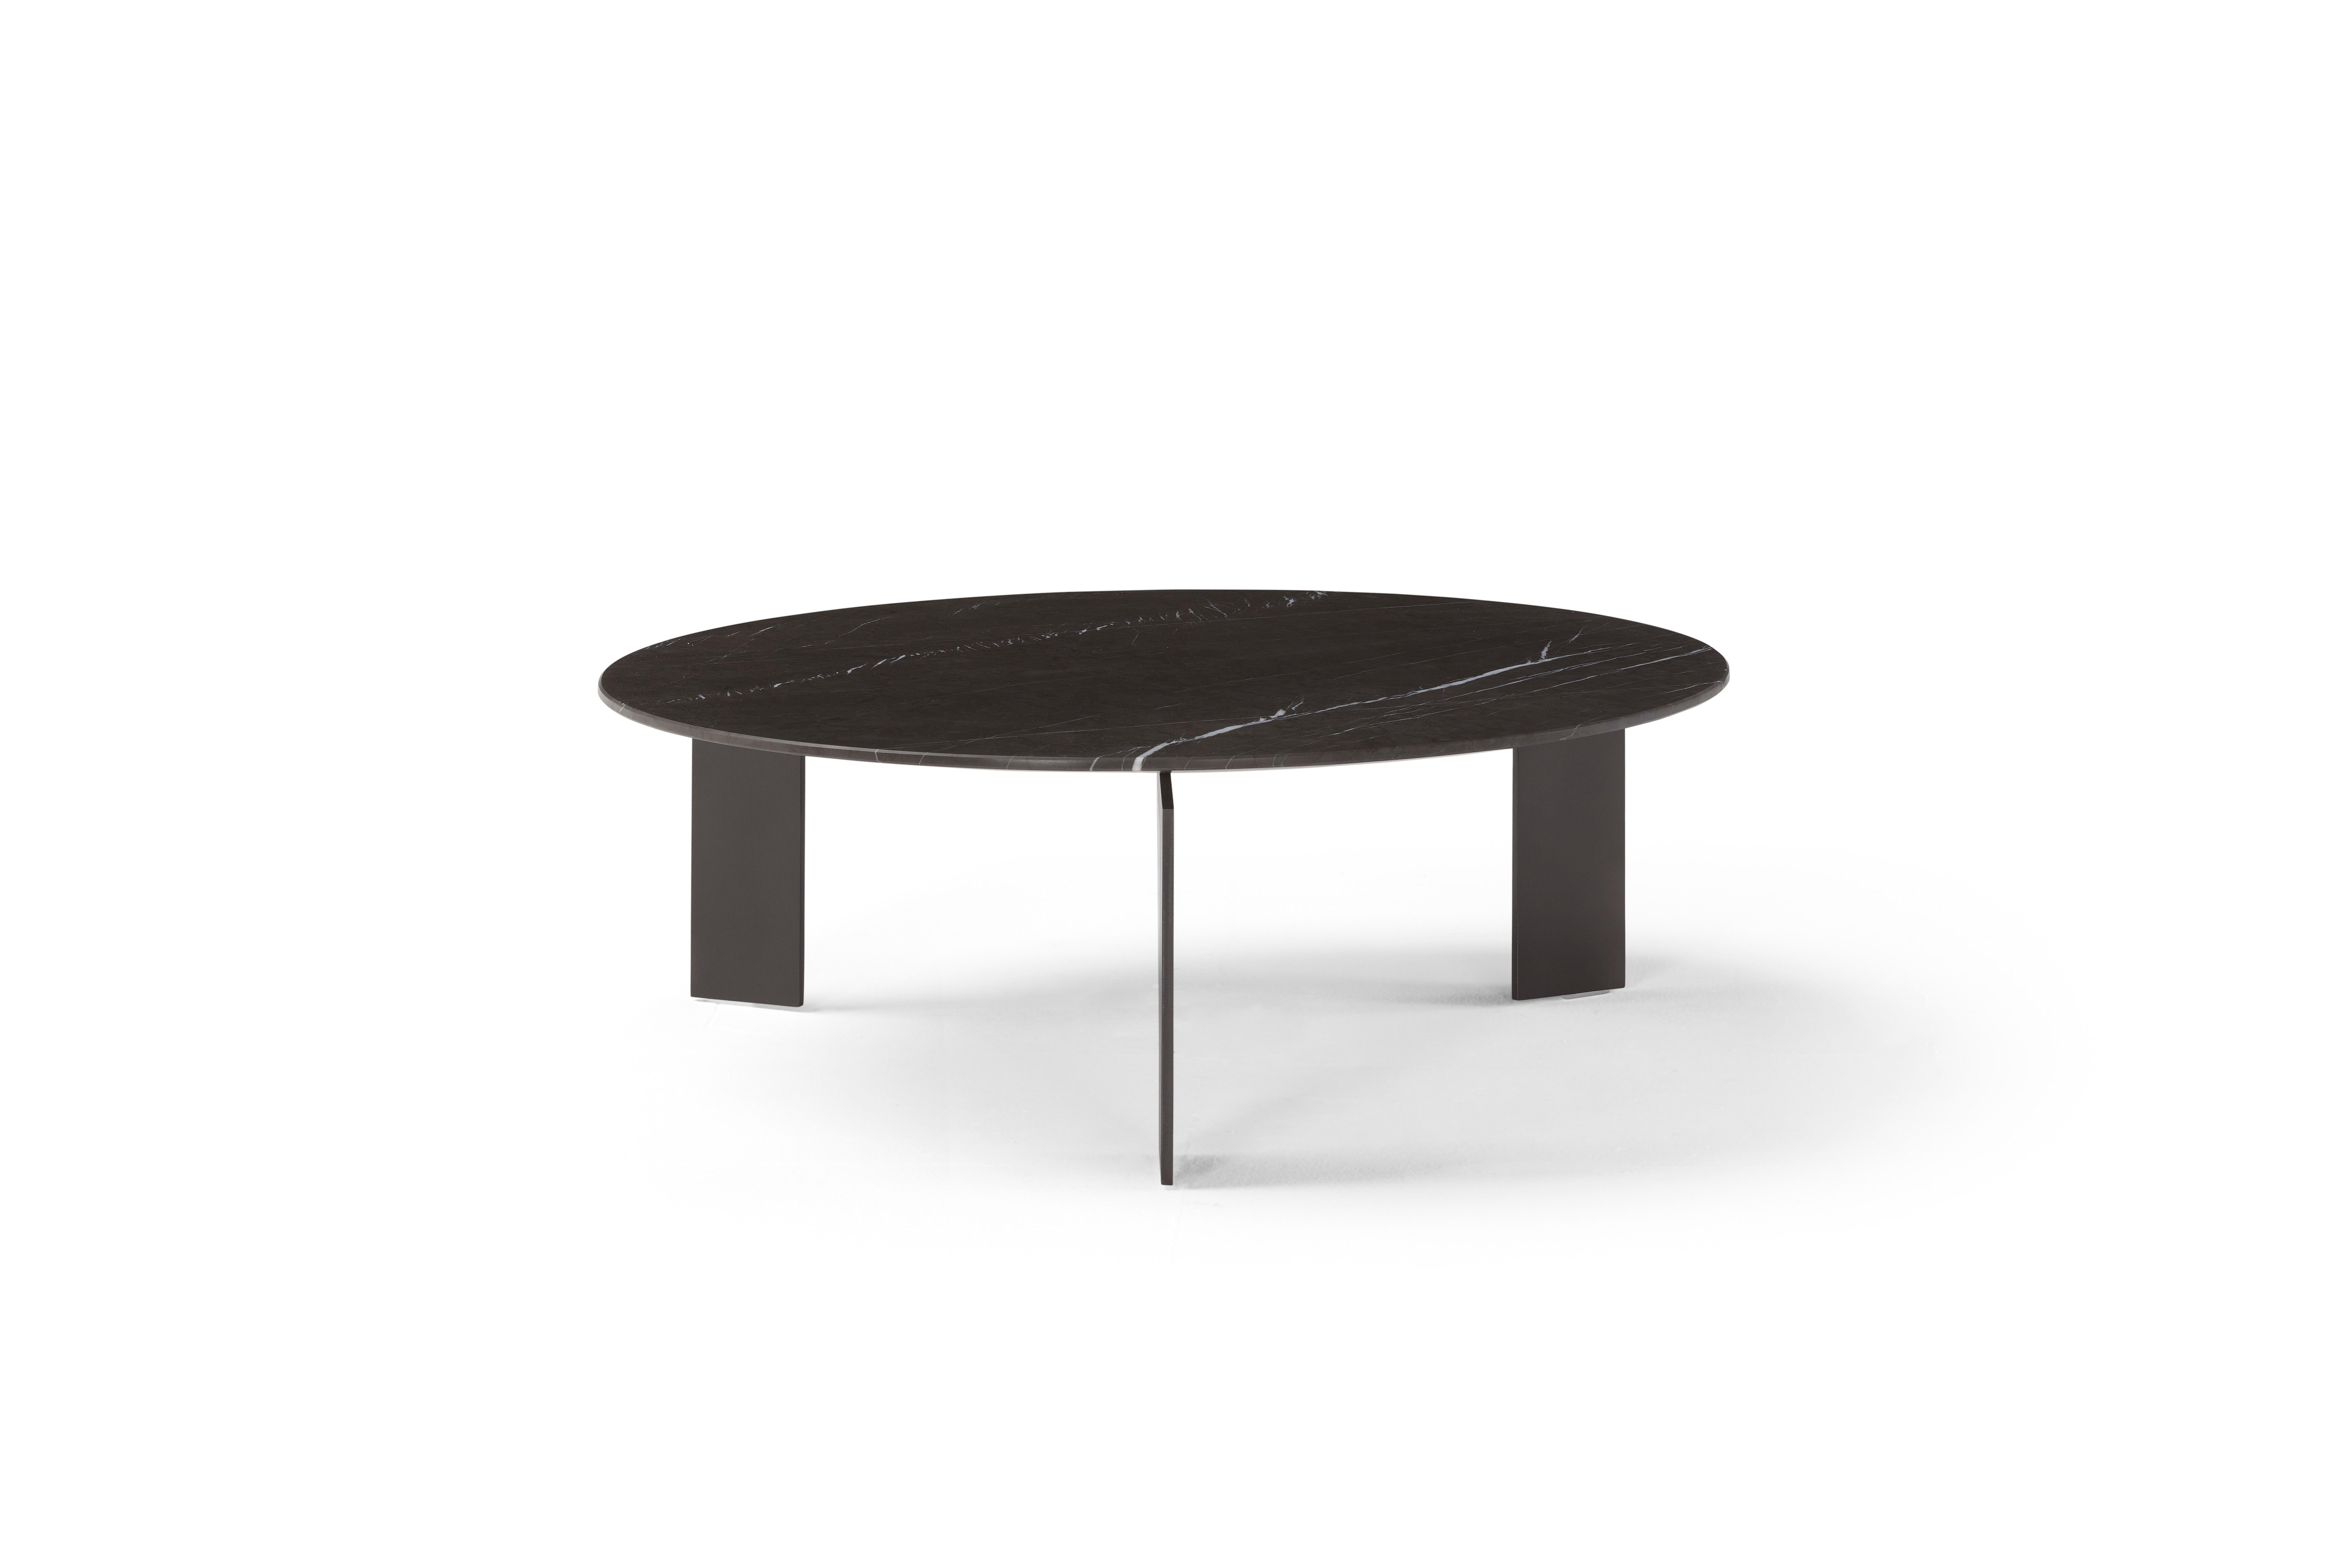 Range is a coffee table collection that combines materials: metal and marble or wood and is inspired by finding the right balance between design and function. Available in four sizes (with different height and diameter of the top), the Range tables